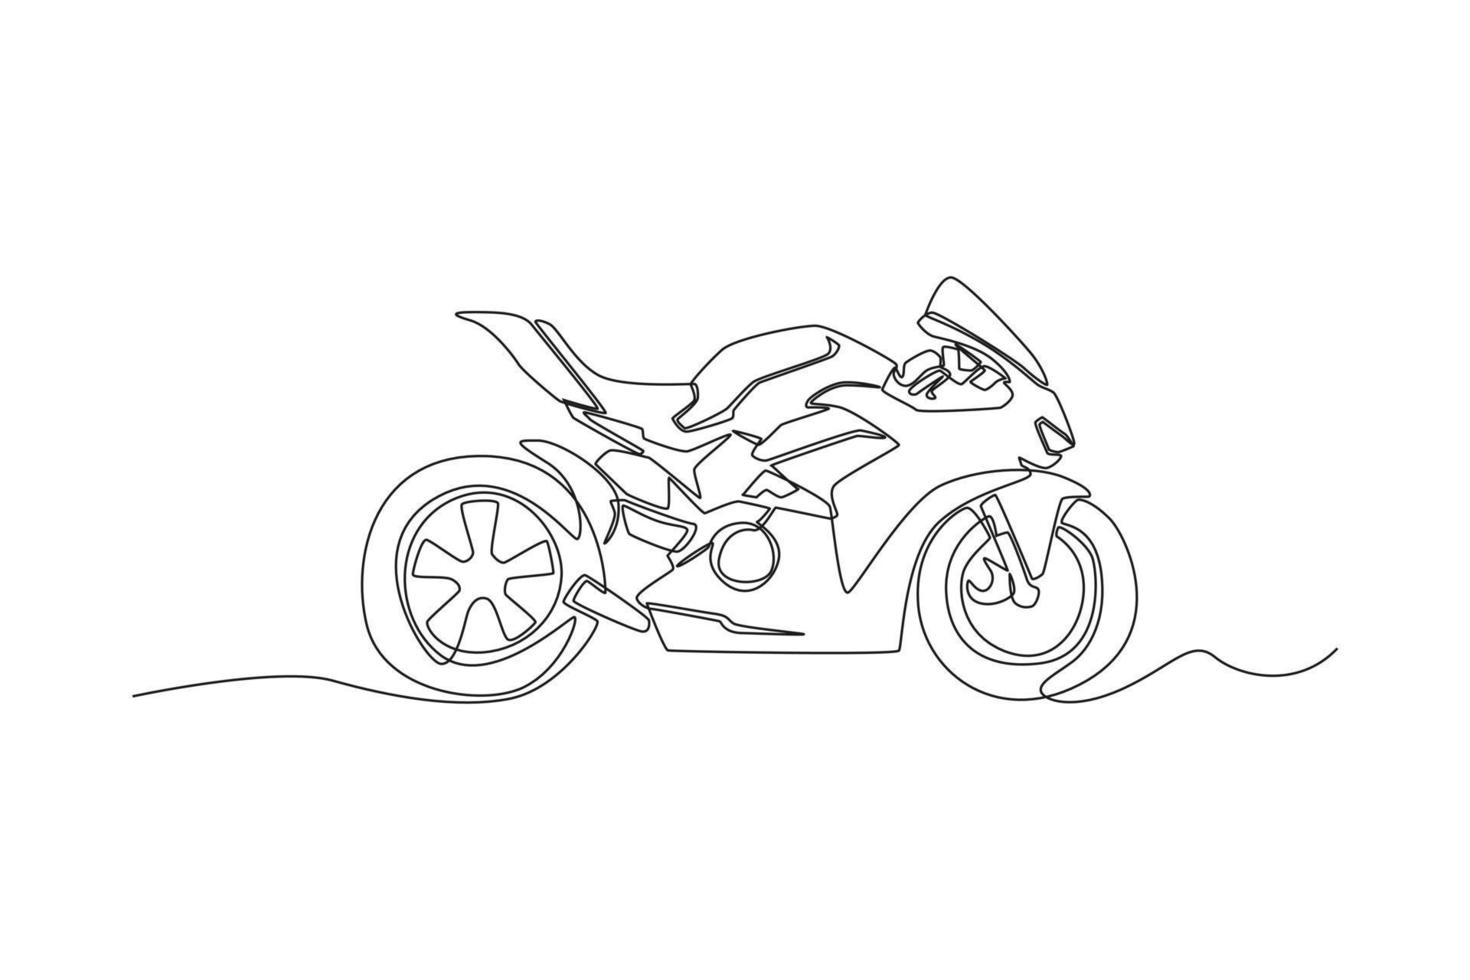 Single one line drawing sport motorcycle. vehicle concept. Continuous line draw design graphic vector illustration.